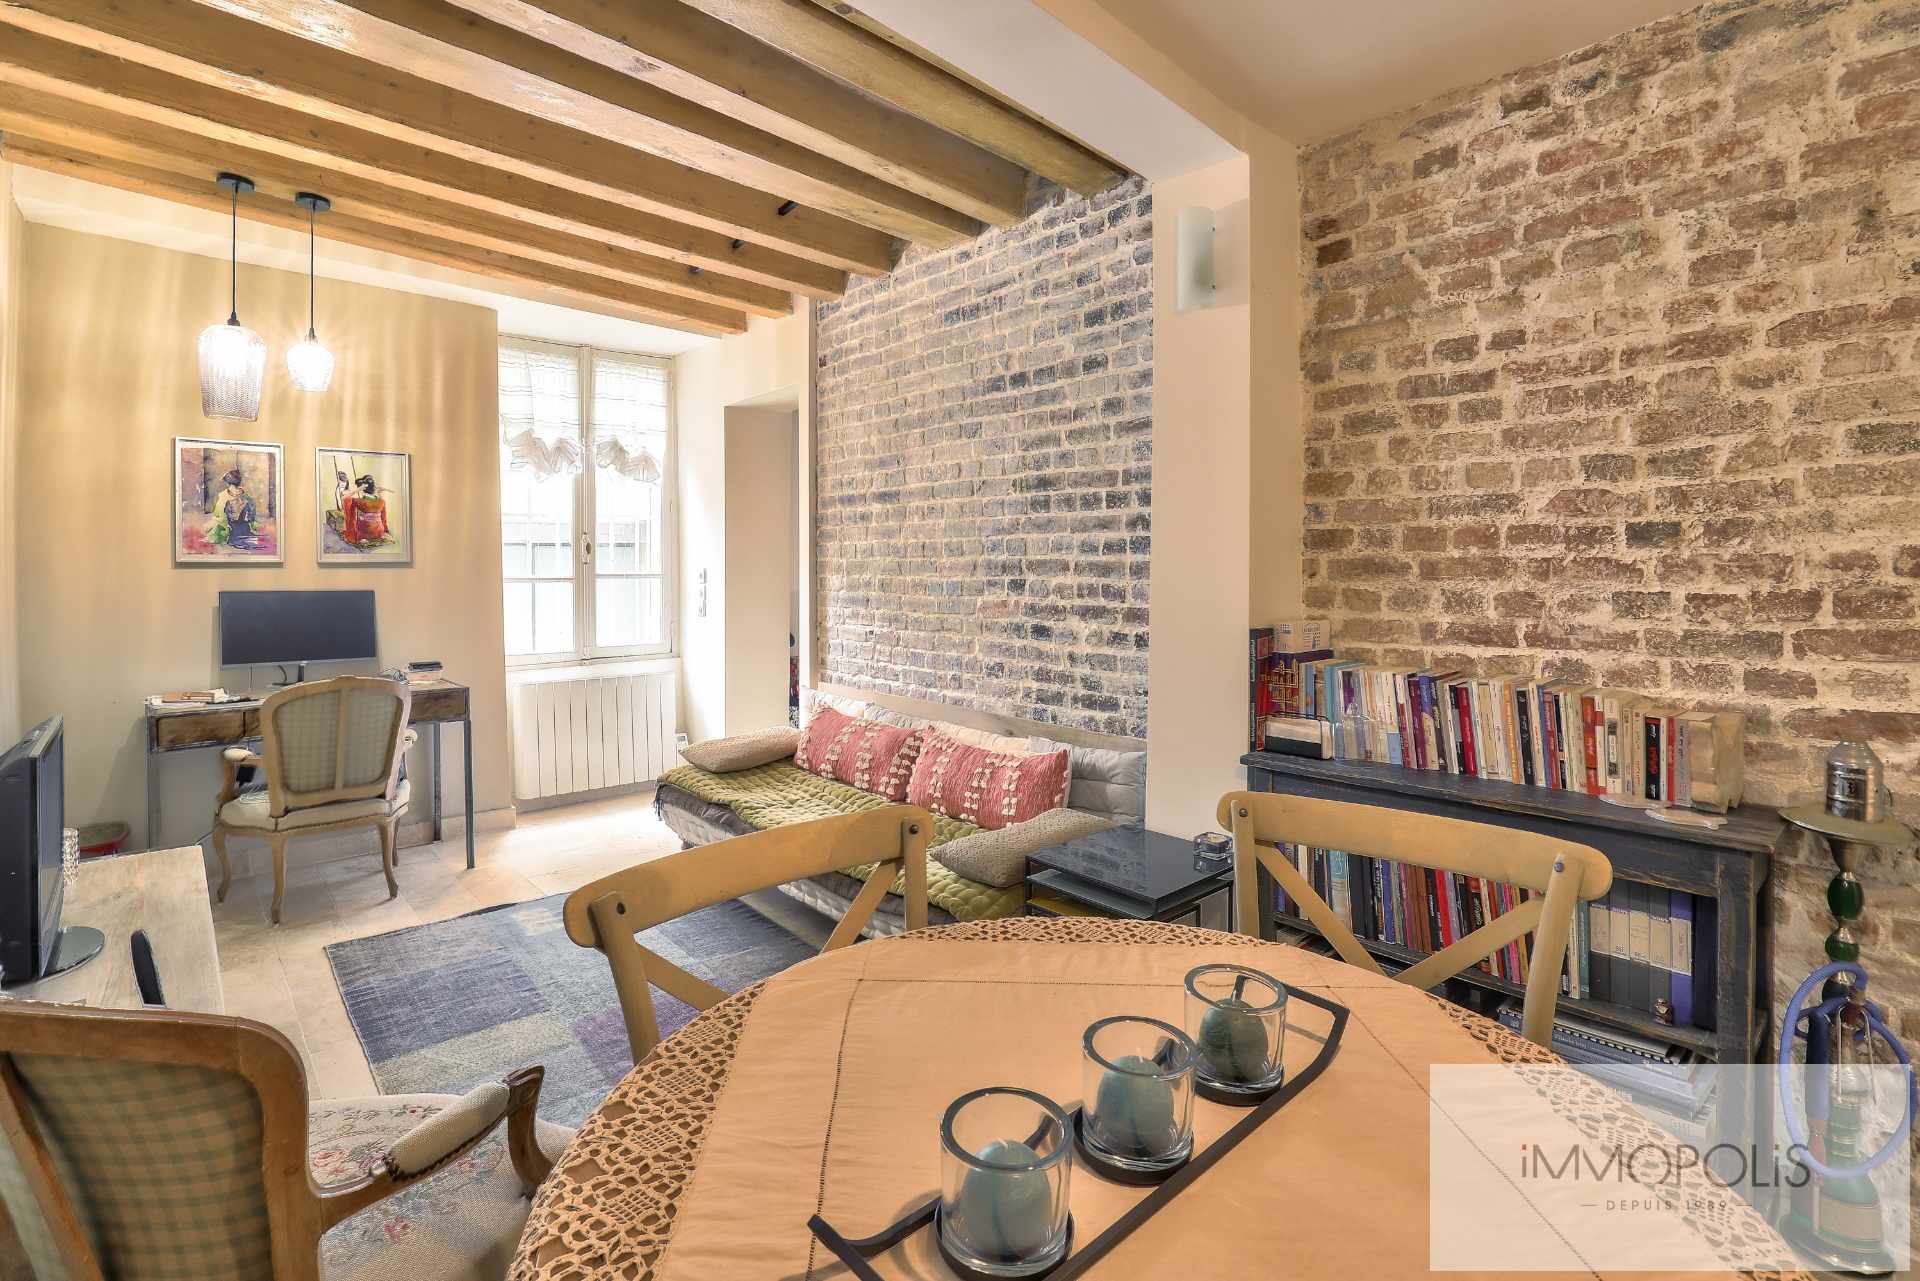 Montmartre, rue Gabrielle, magnificent 2 rooms entirely renovated with stones, bricks and exposed beams: like a house! 4